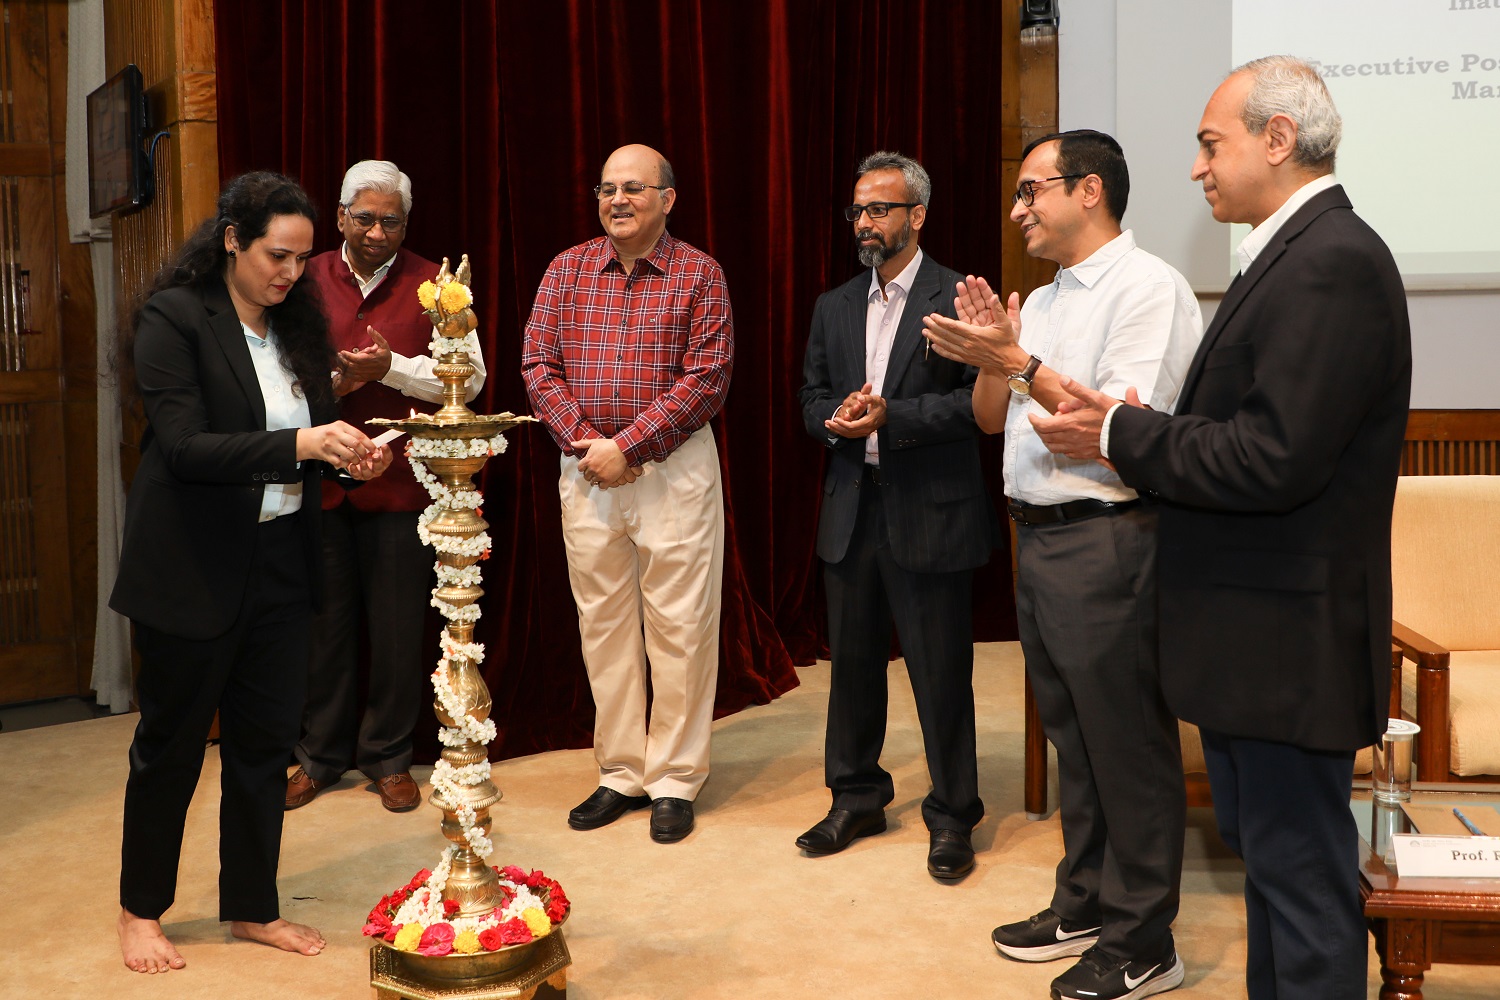 An EPGP student, from the Class of 2023-24, lights the lamp at the EPGP inauguration on 25th March 2023. Prof. Rajendra K Bandi, Dean Administration, IIMB, Prof. Rishikesha T Krishnan, Director, IIMB, Amith Parameshwara, former Managing Director, Accenture Strategy and Consulting, Prof. Ashis Mishra, Chairperson, Admissions and Financial Aid, IIMB, and Prof. Ashok Thampy, Chairperson, EPGP, IIMB, applaud.